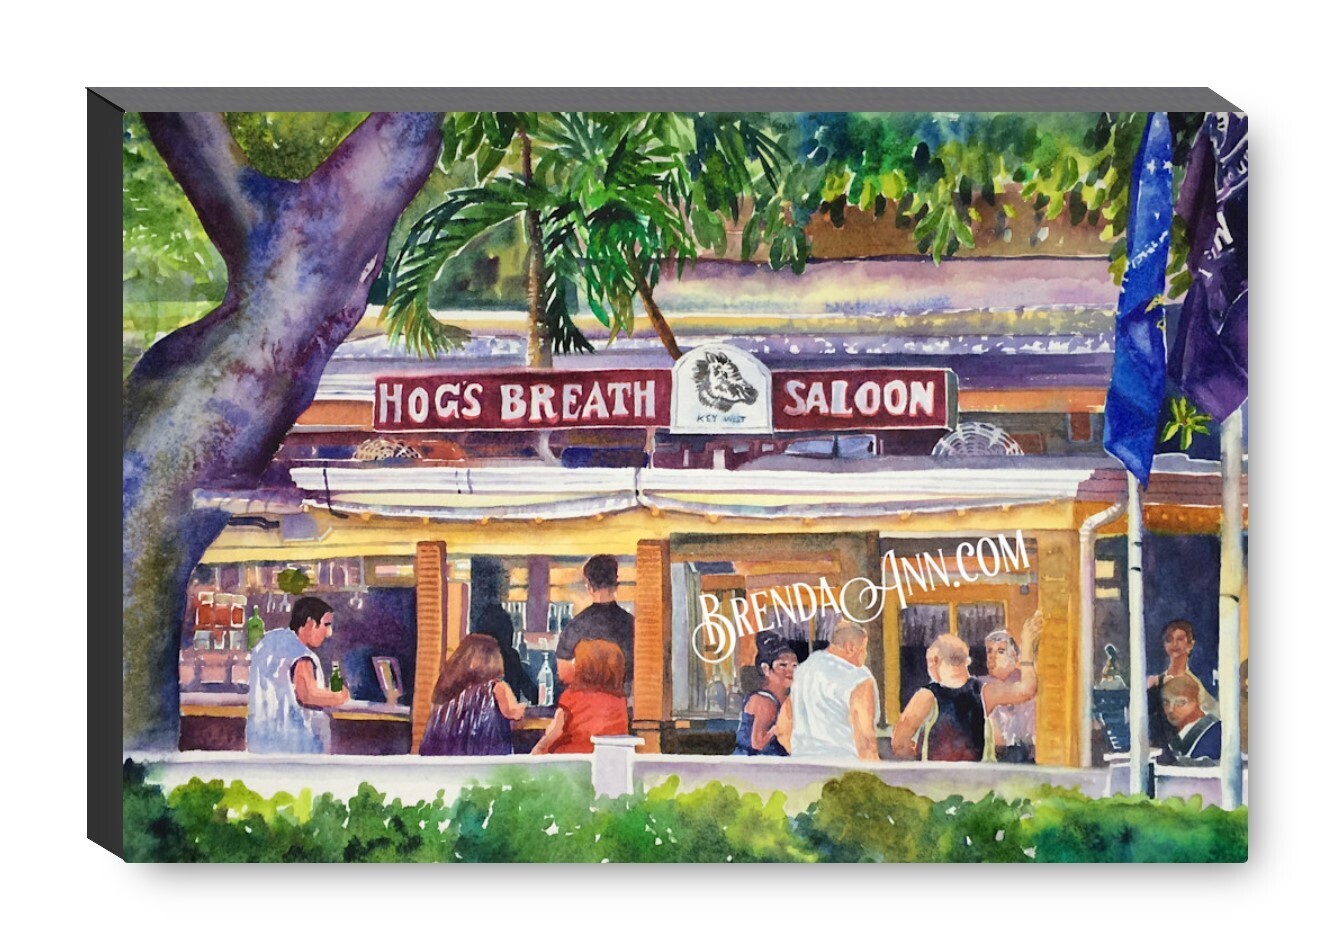 Hog's Breath Saloon Key West Canvas Gallery Wrapped Print - Watercolor Art - Ready to hang on a wall